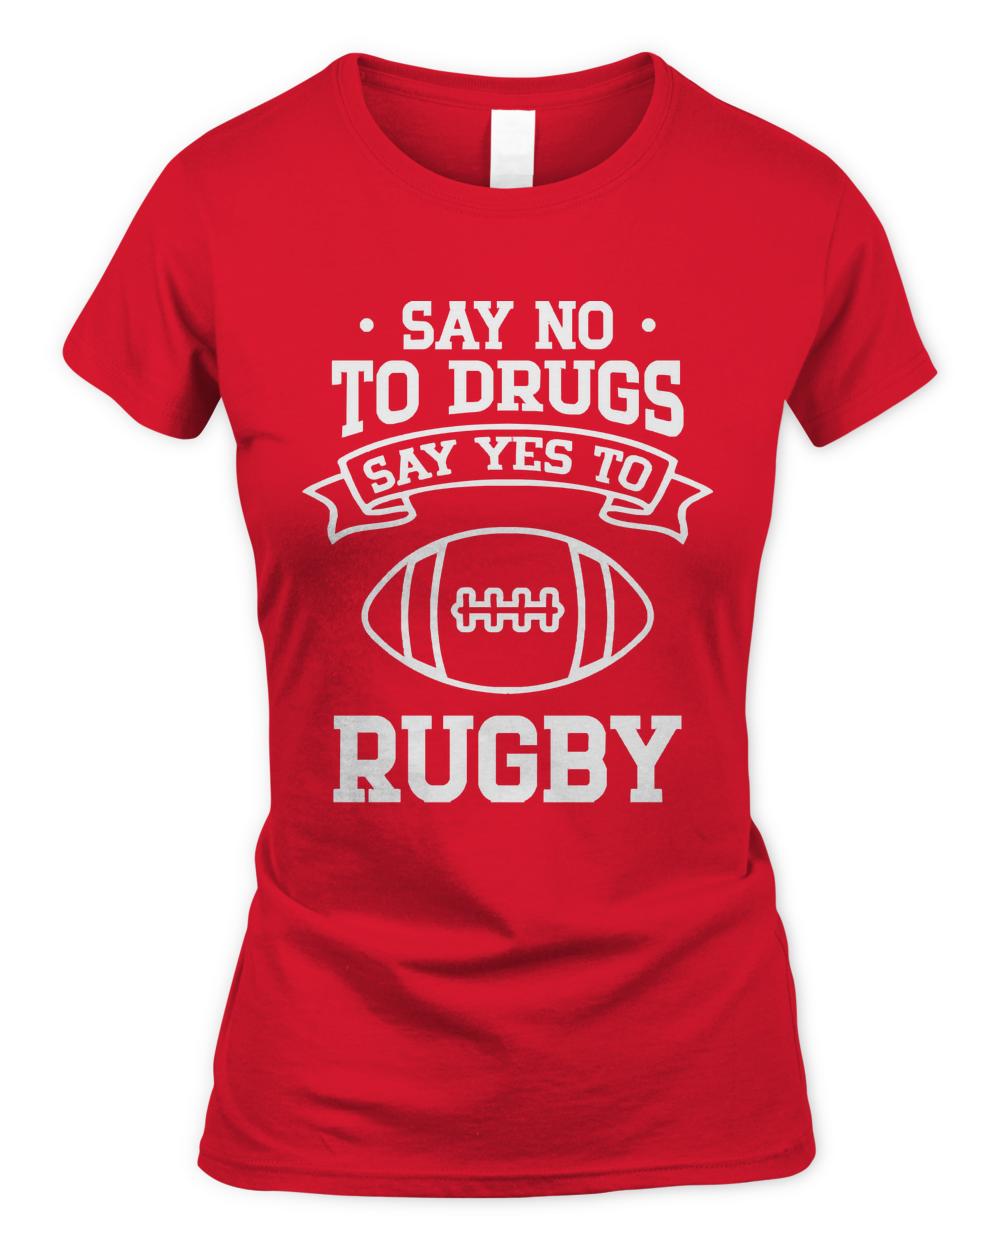 Say No To Drugs T- Shirt Say No to Drugs Say Yes to Rugby T- Shirt